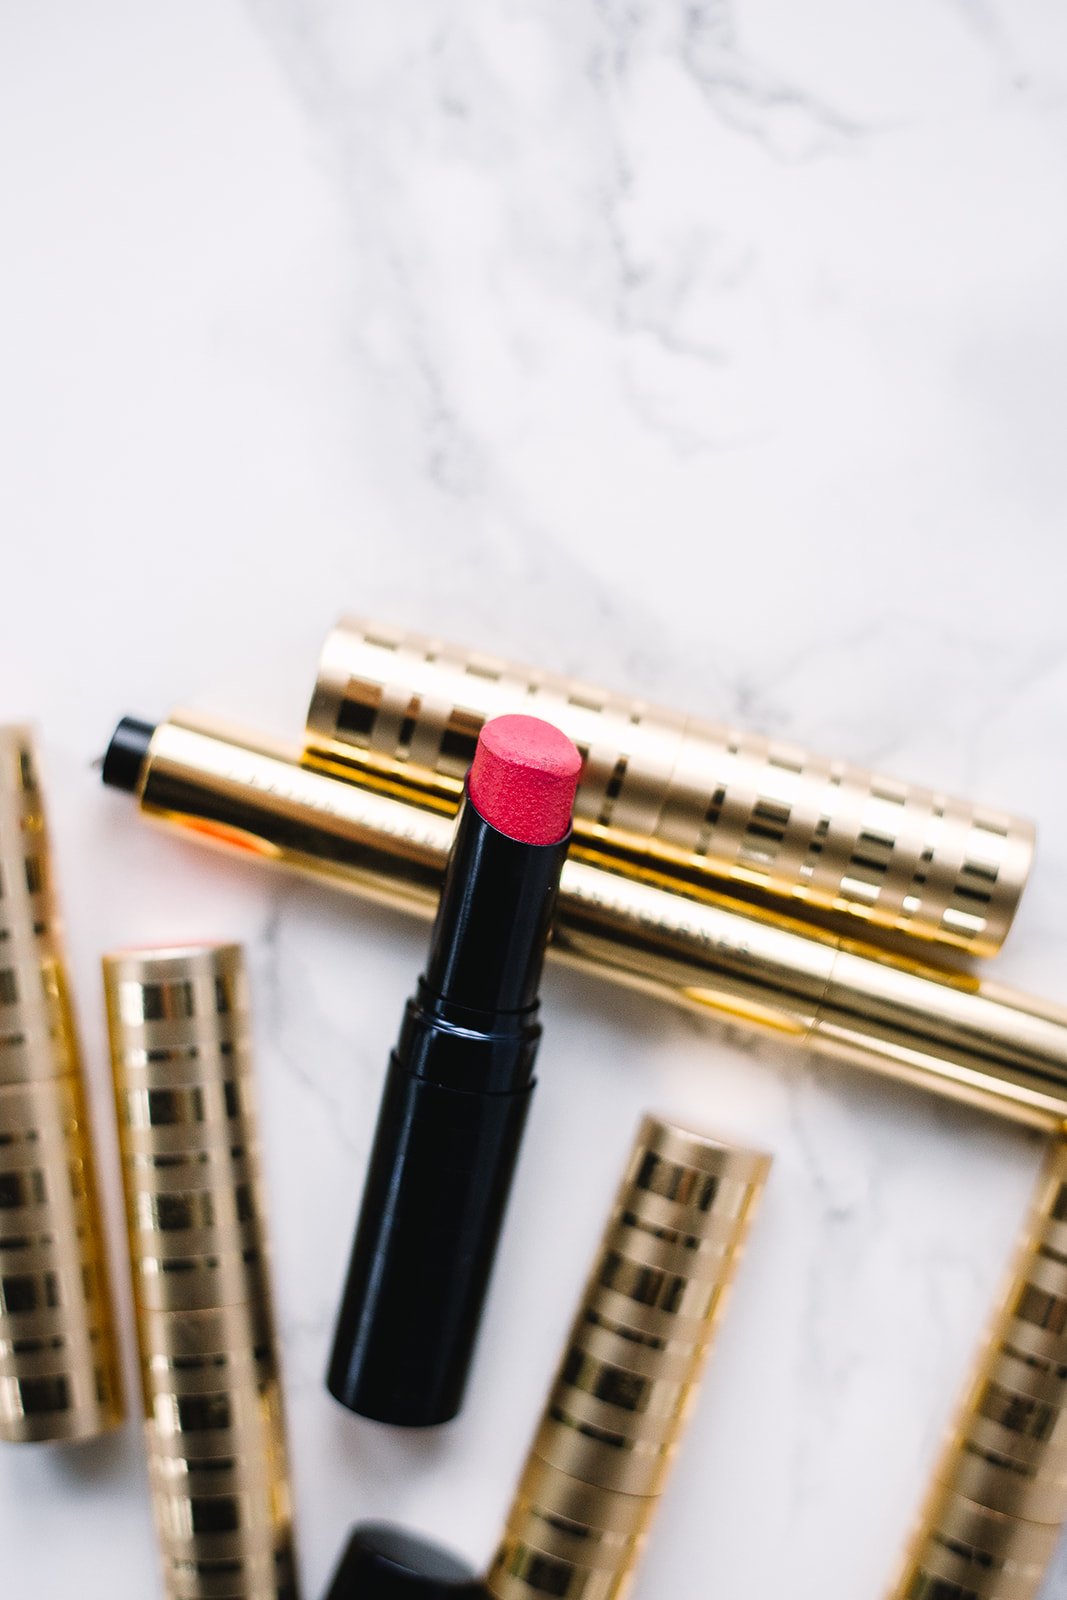 gluten-free, nut-free and soy-free lip color